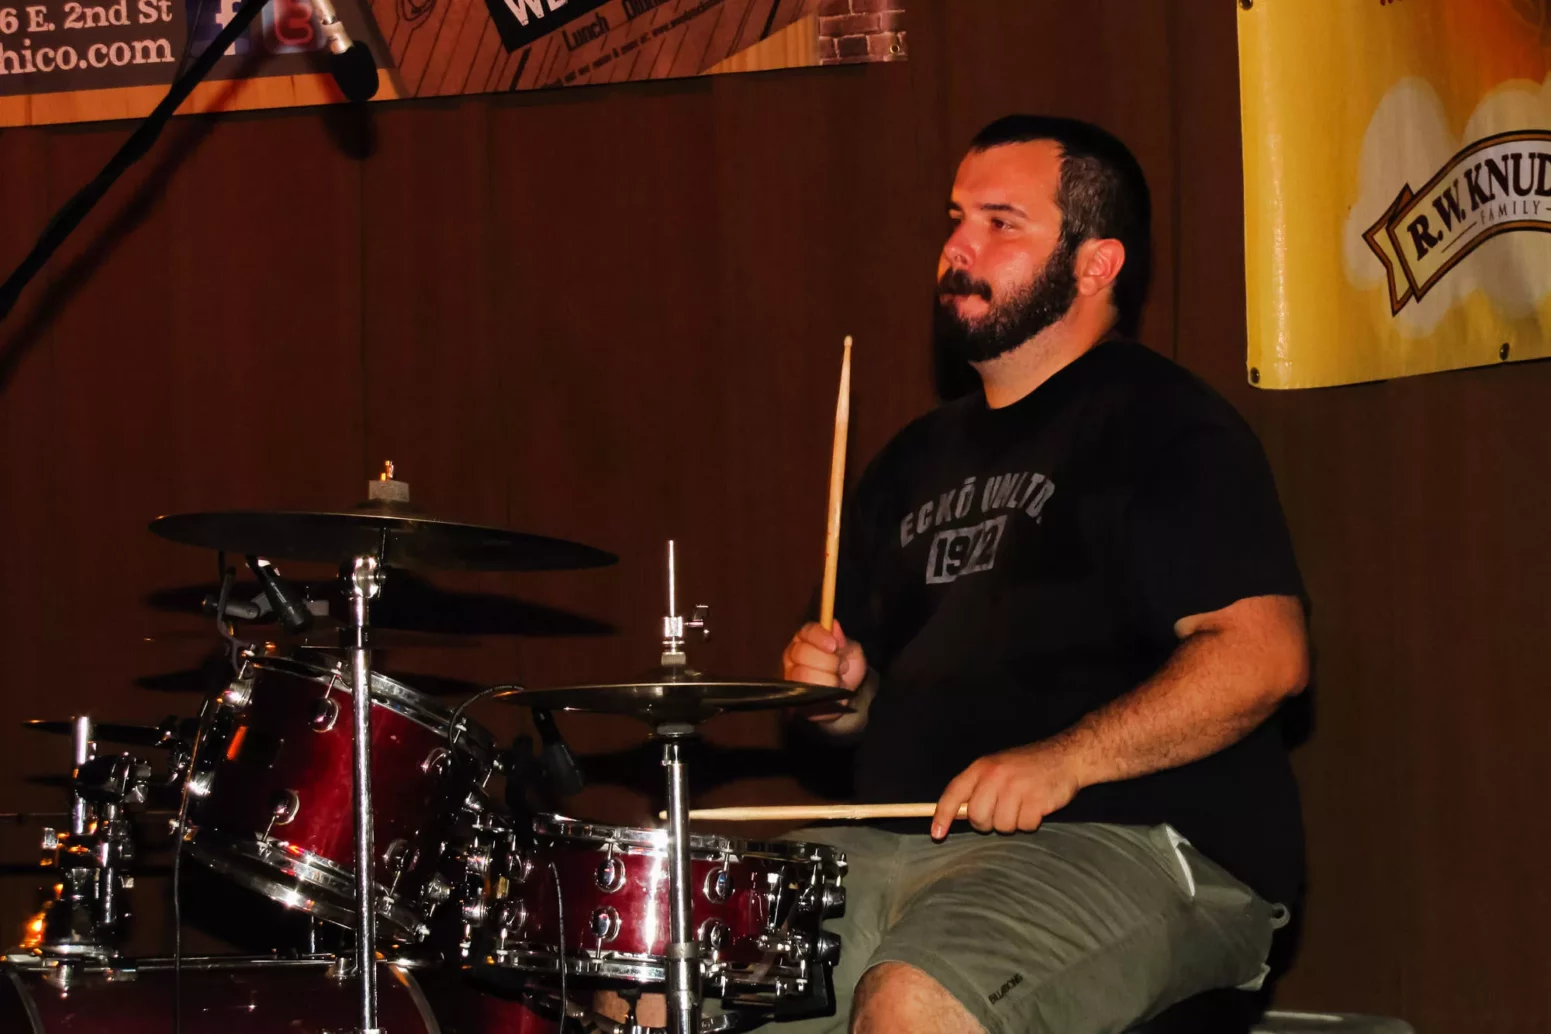 Tyler Coates on drums as The Jeff Pershing performs during Friday Night Concerts.